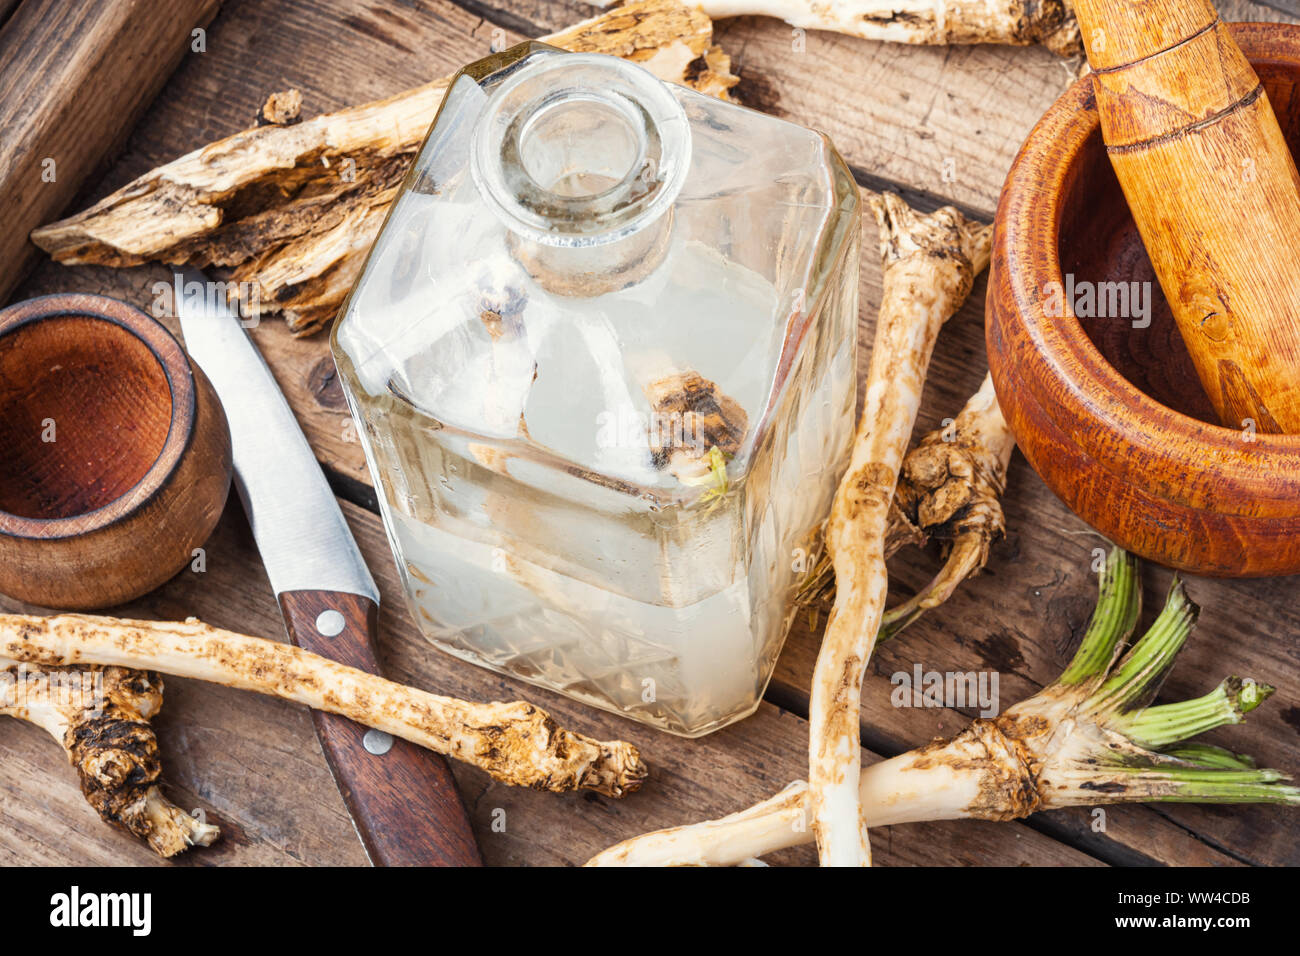 Traditional alcoholic drink from horseradish roots.Russian or Ukrainian cuisine Stock Photo